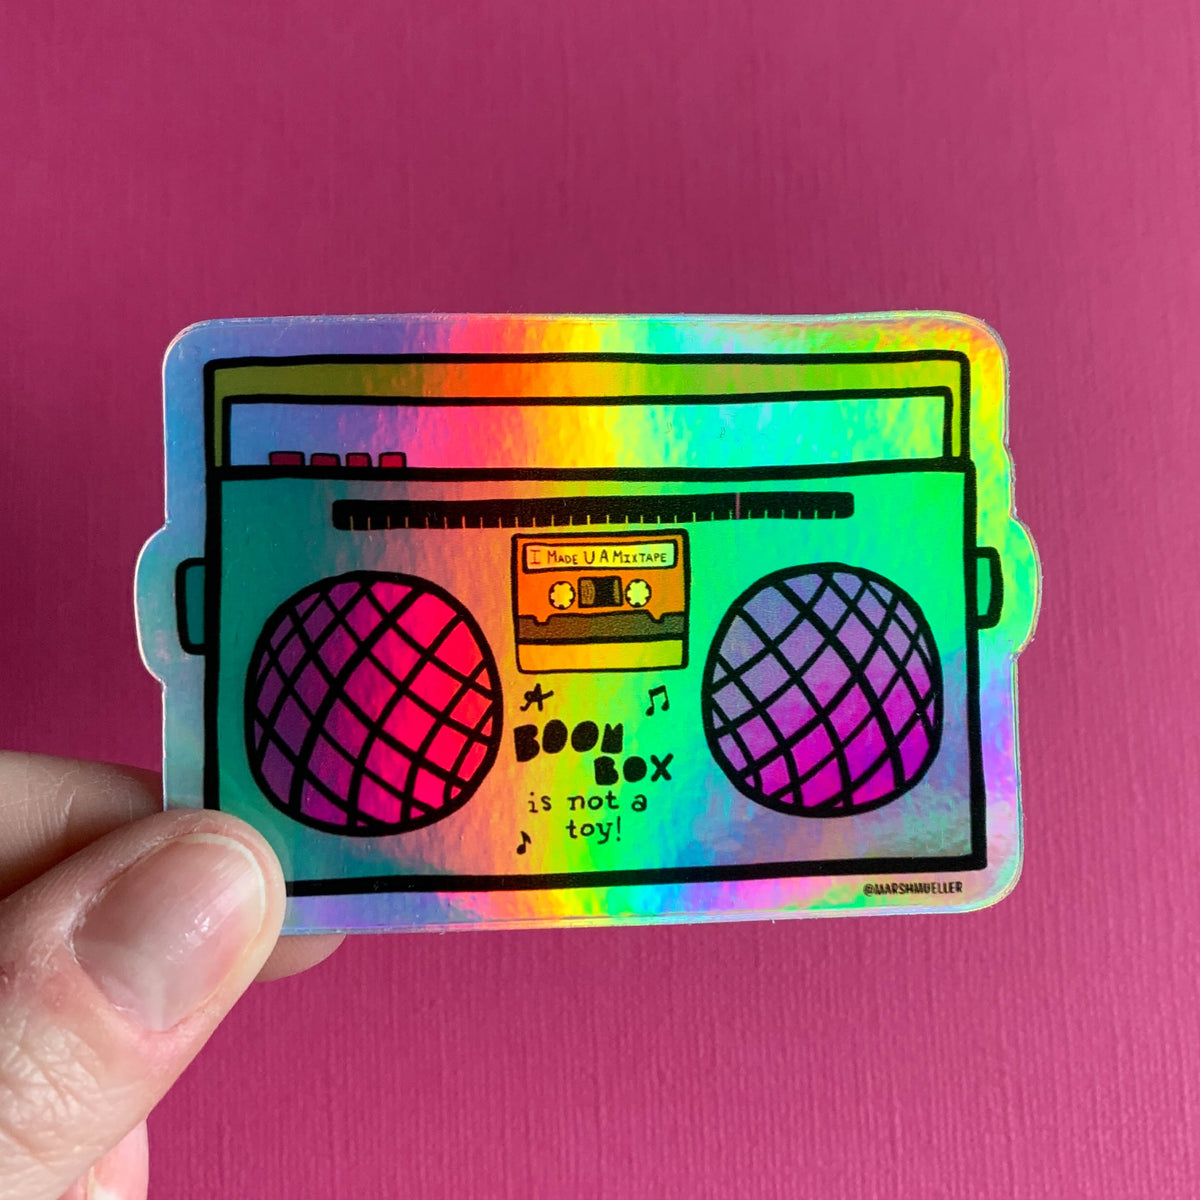 hand holding a holographic die cut sticker of a boom box illustration on a pink background